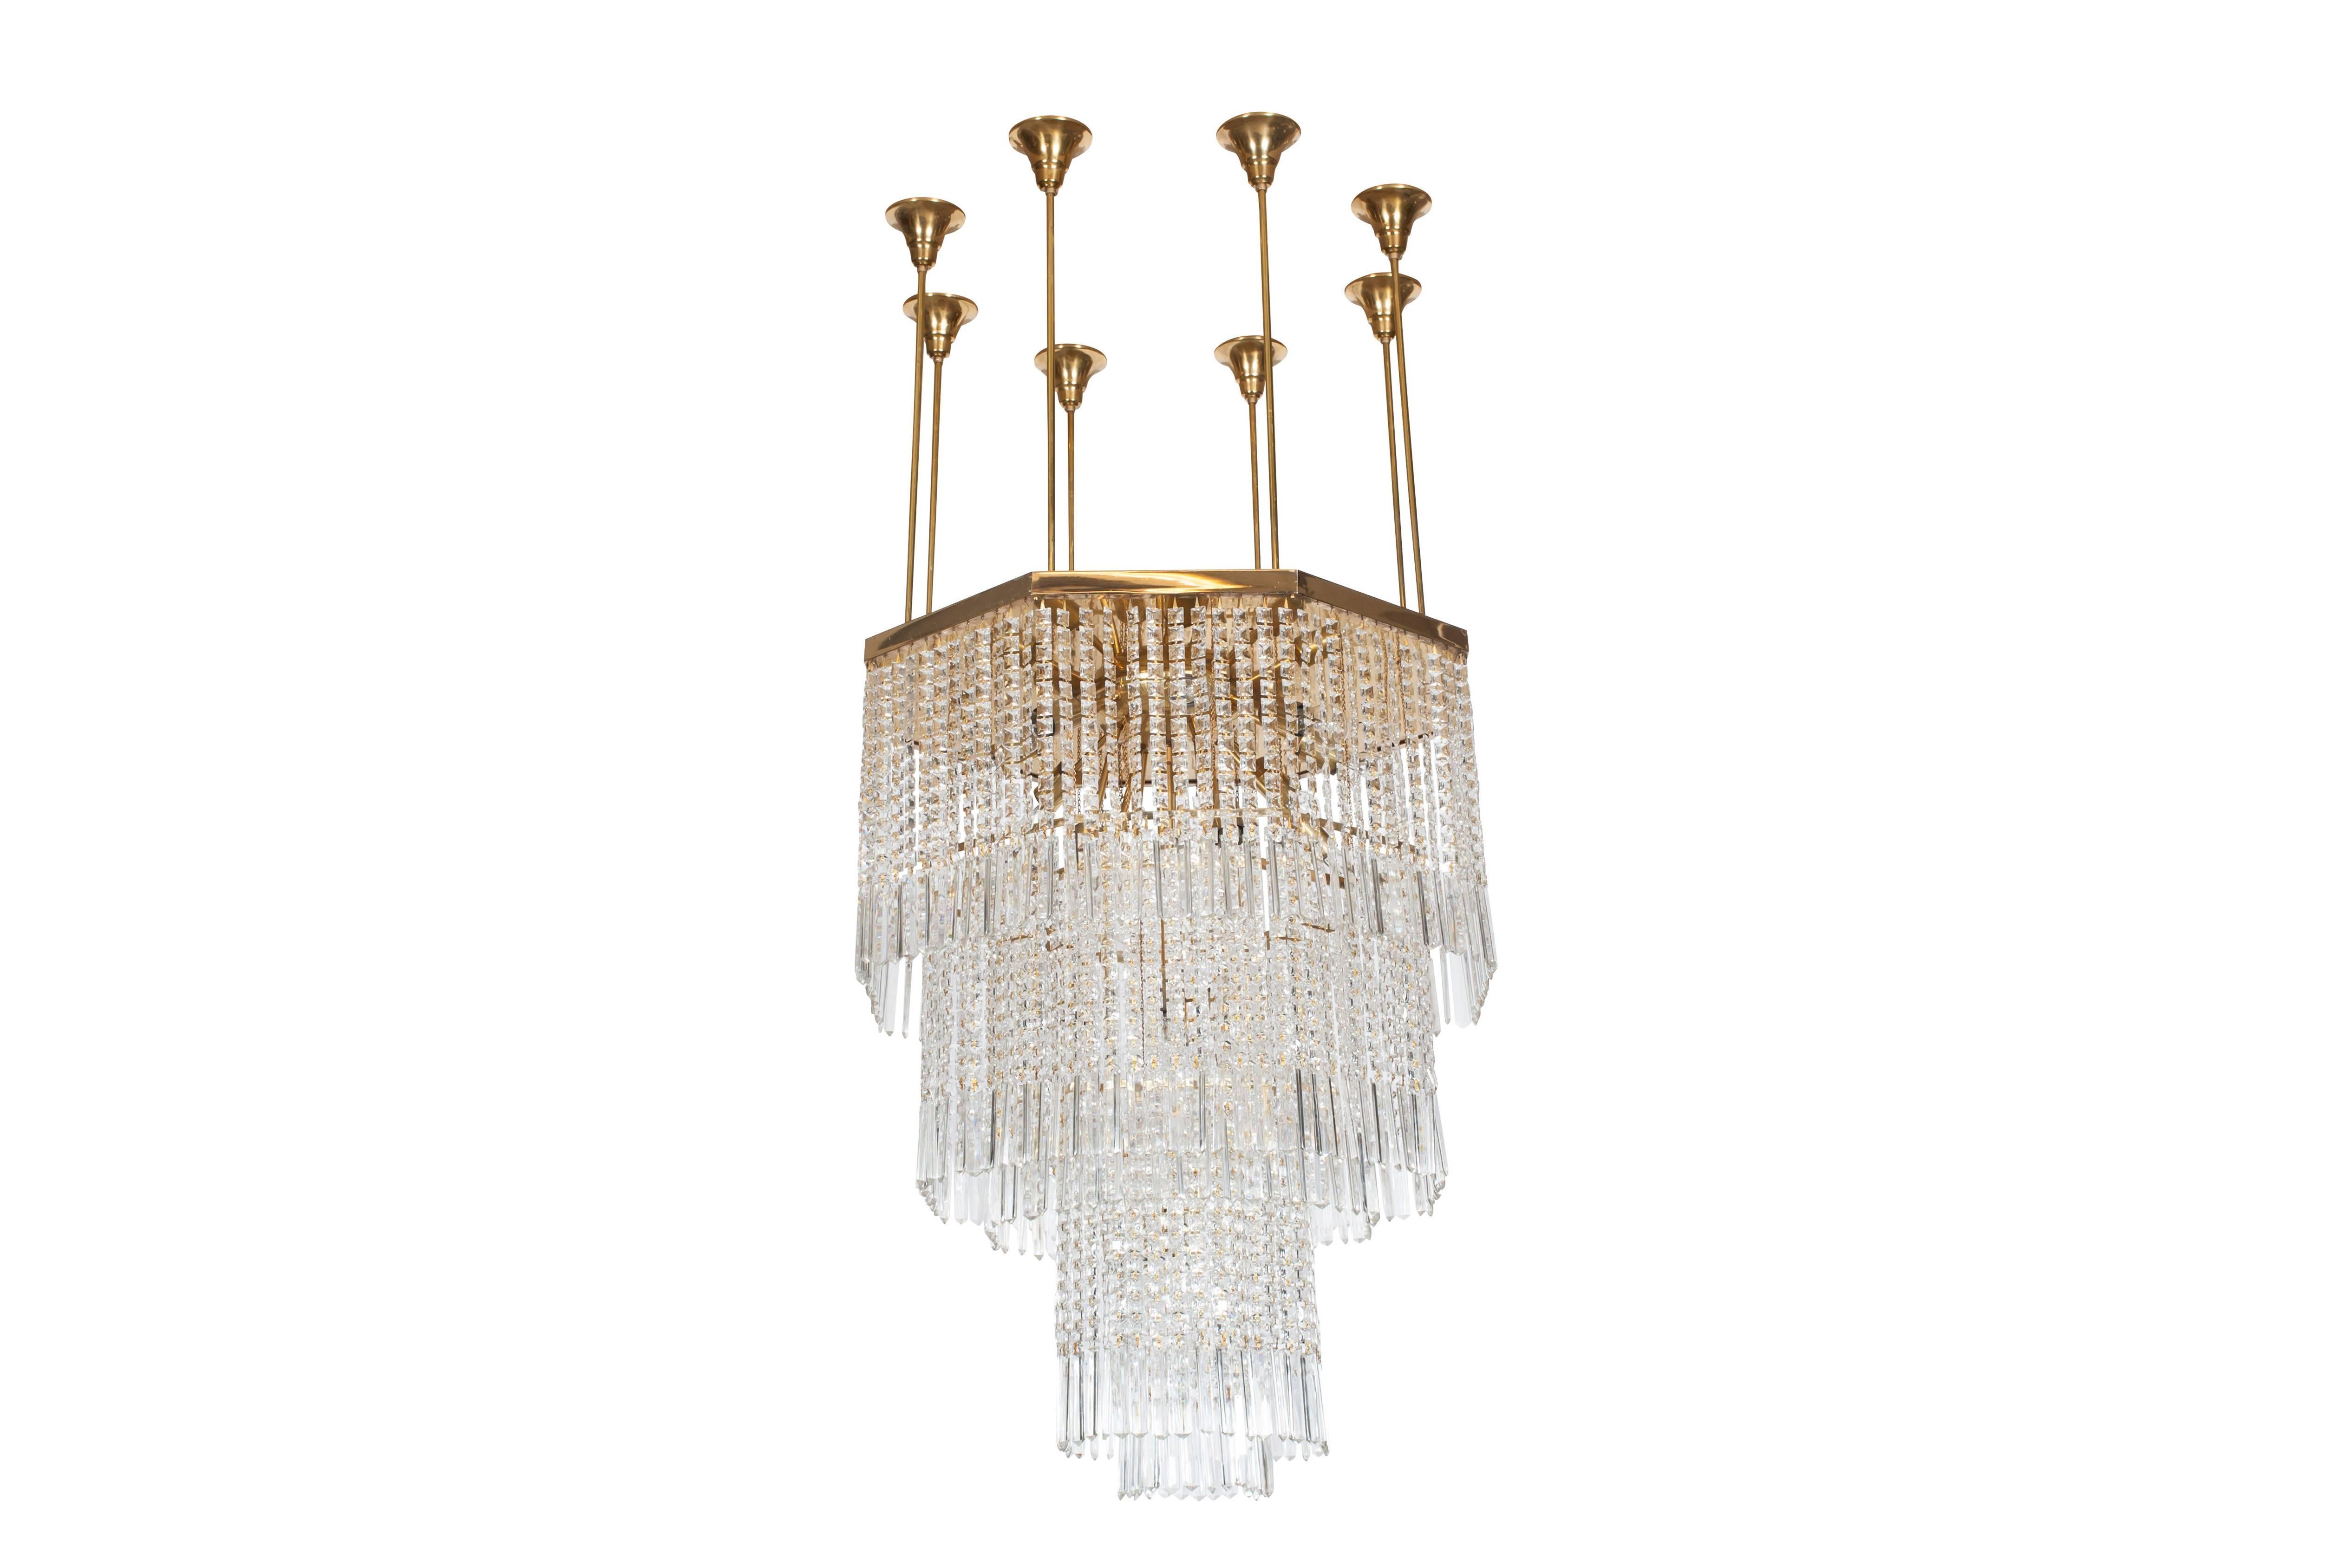 Mid-20th Century Regency Impressive Brass and Glass Chandelier, Italy, 1950s